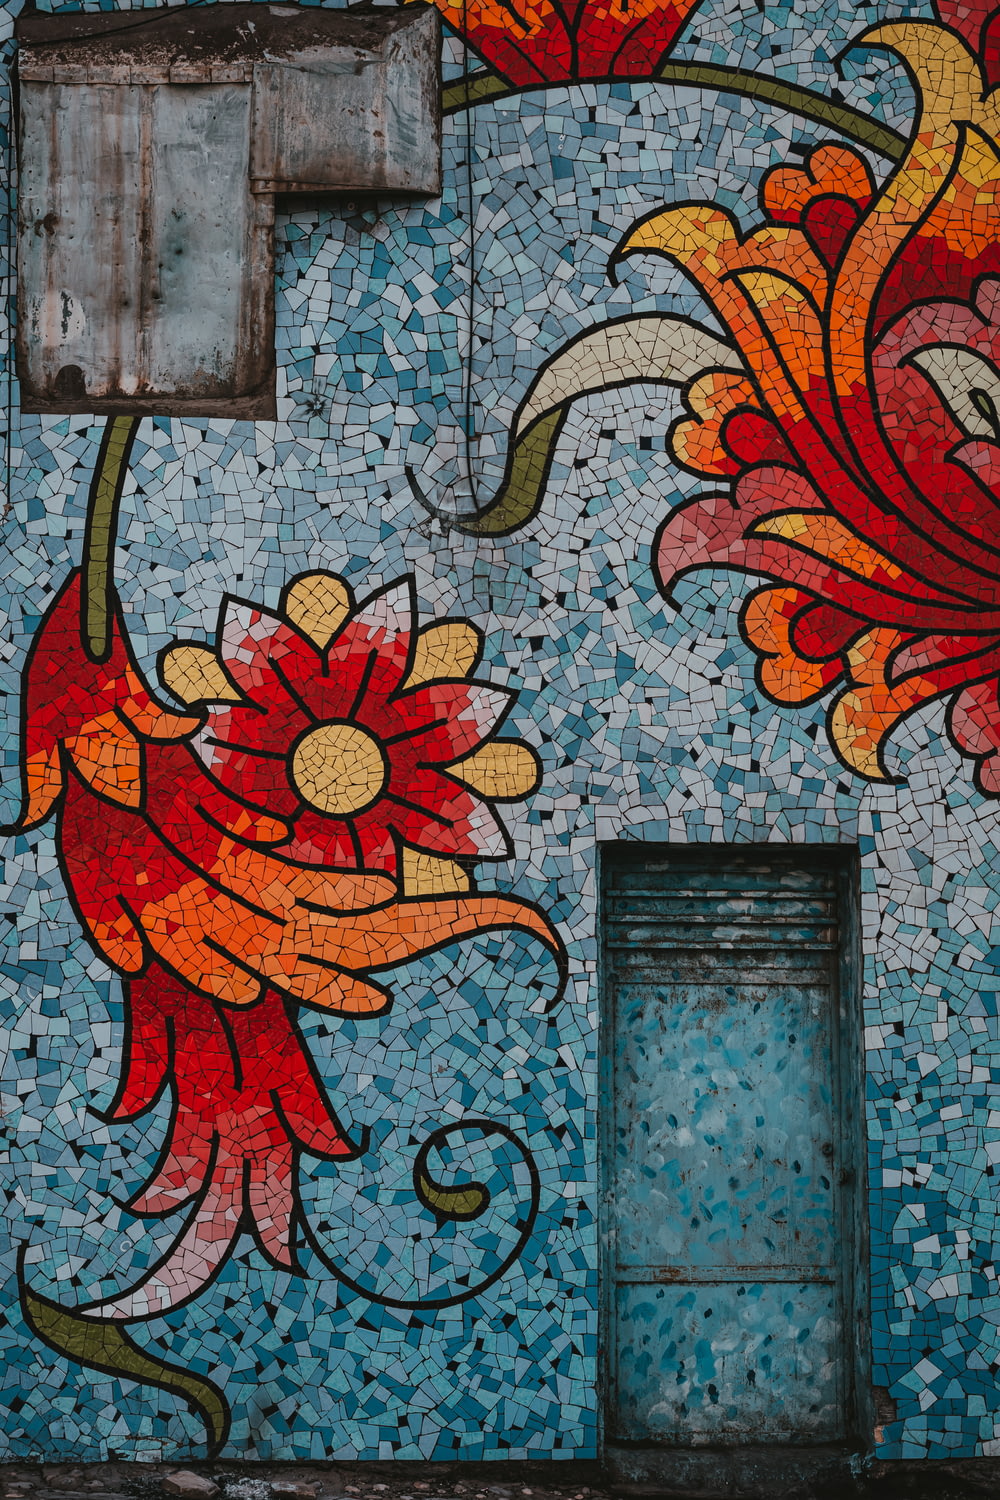 a painting of flowers painted on the side of a building